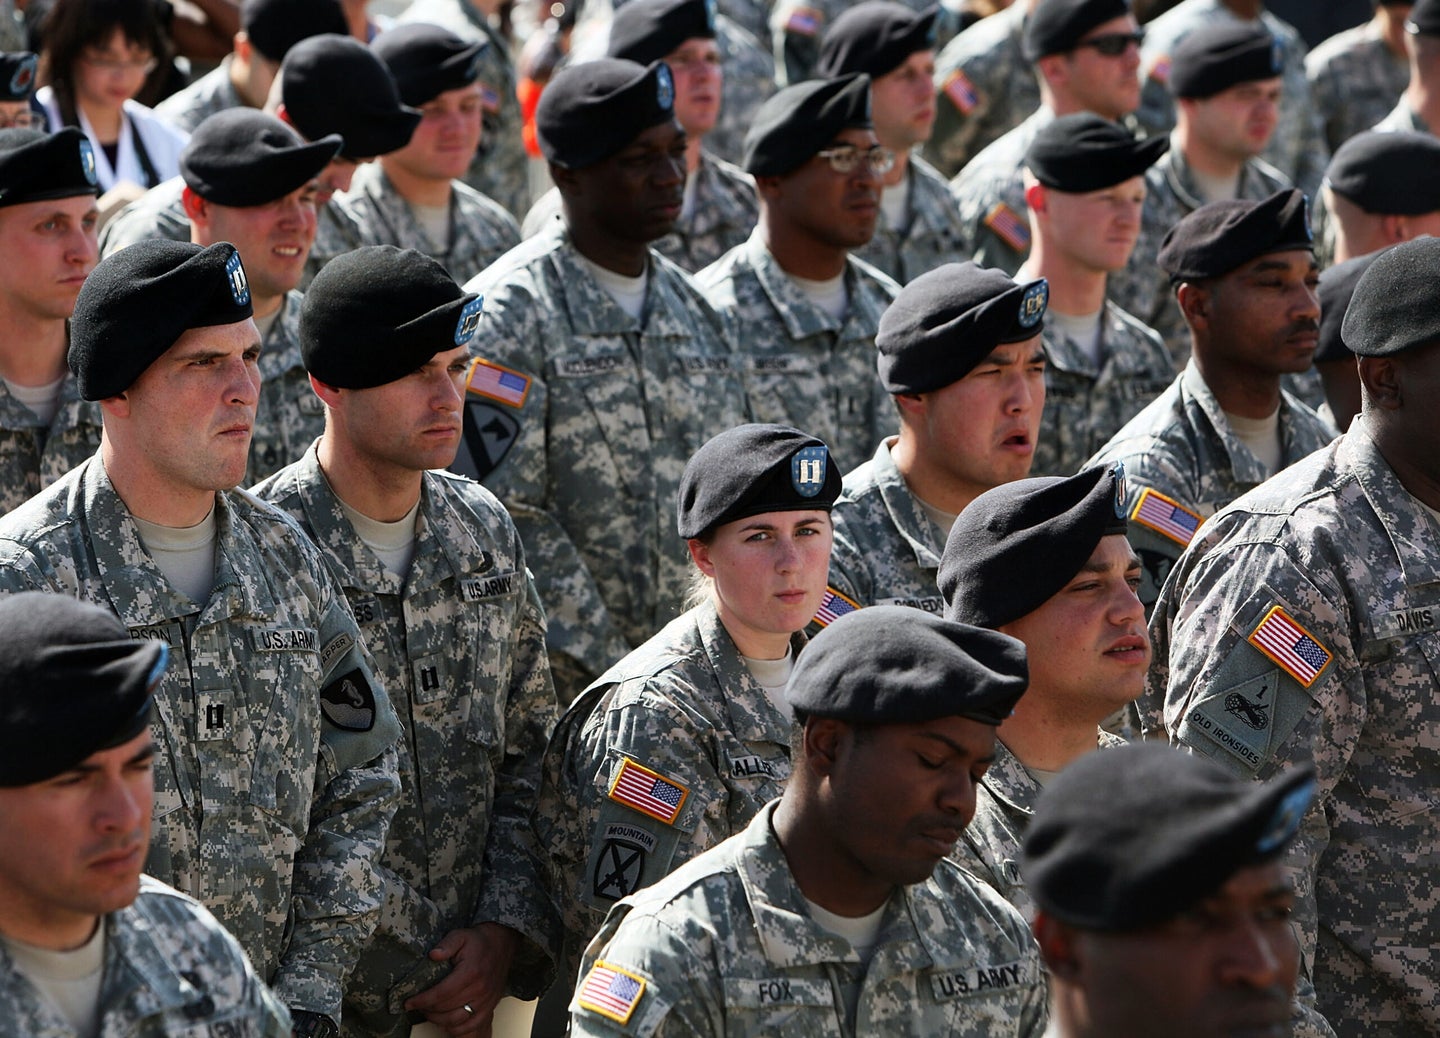 U.S. Army soldiers stand together as they wait for the start of memorial service for the thirteen victims of the shooting rampage by U.S. Army Major Nidal Malik Hasan on November 10, 2009 in Fort Hood, Texas. Hasan, an army psychiatrist, killed 13 people and wounded 30 in a shooting at the military base on November 5, 2009.  (Photo by Joe Raedle/Getty Images)